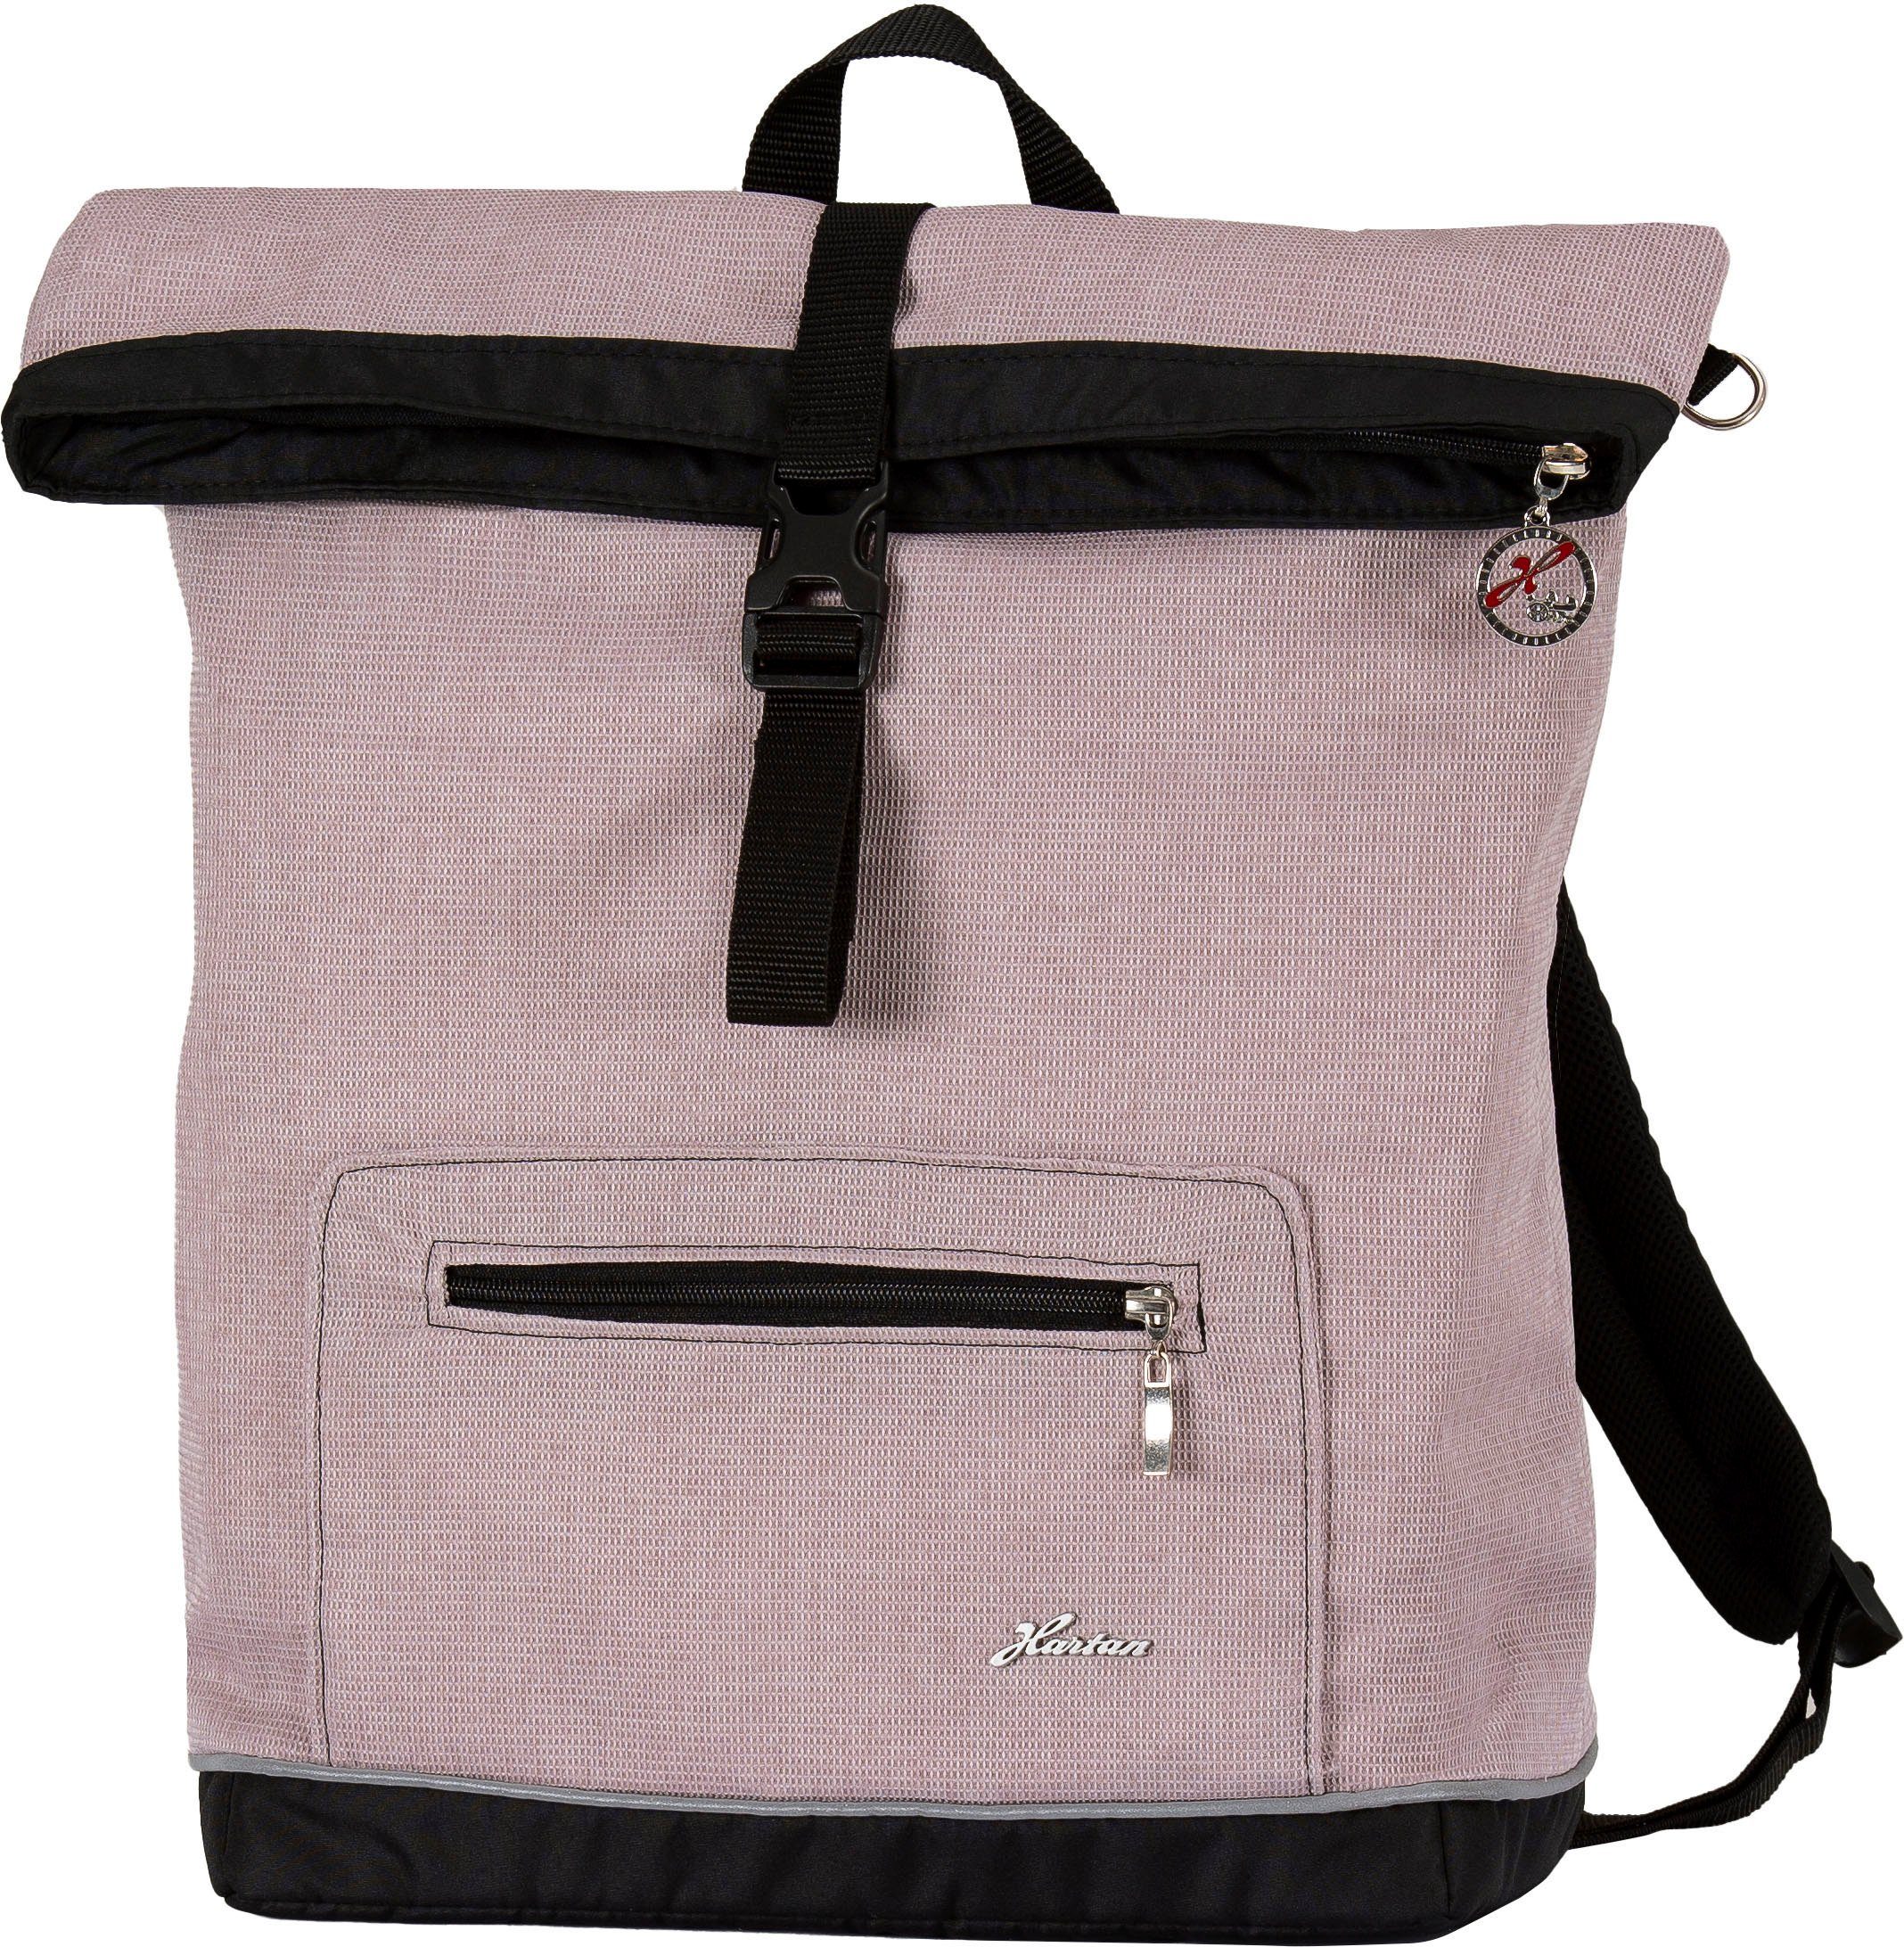 Hartan Wickelrucksack Space bag - Casual Collection, mit Thermofach; Made in Germany rosy birds